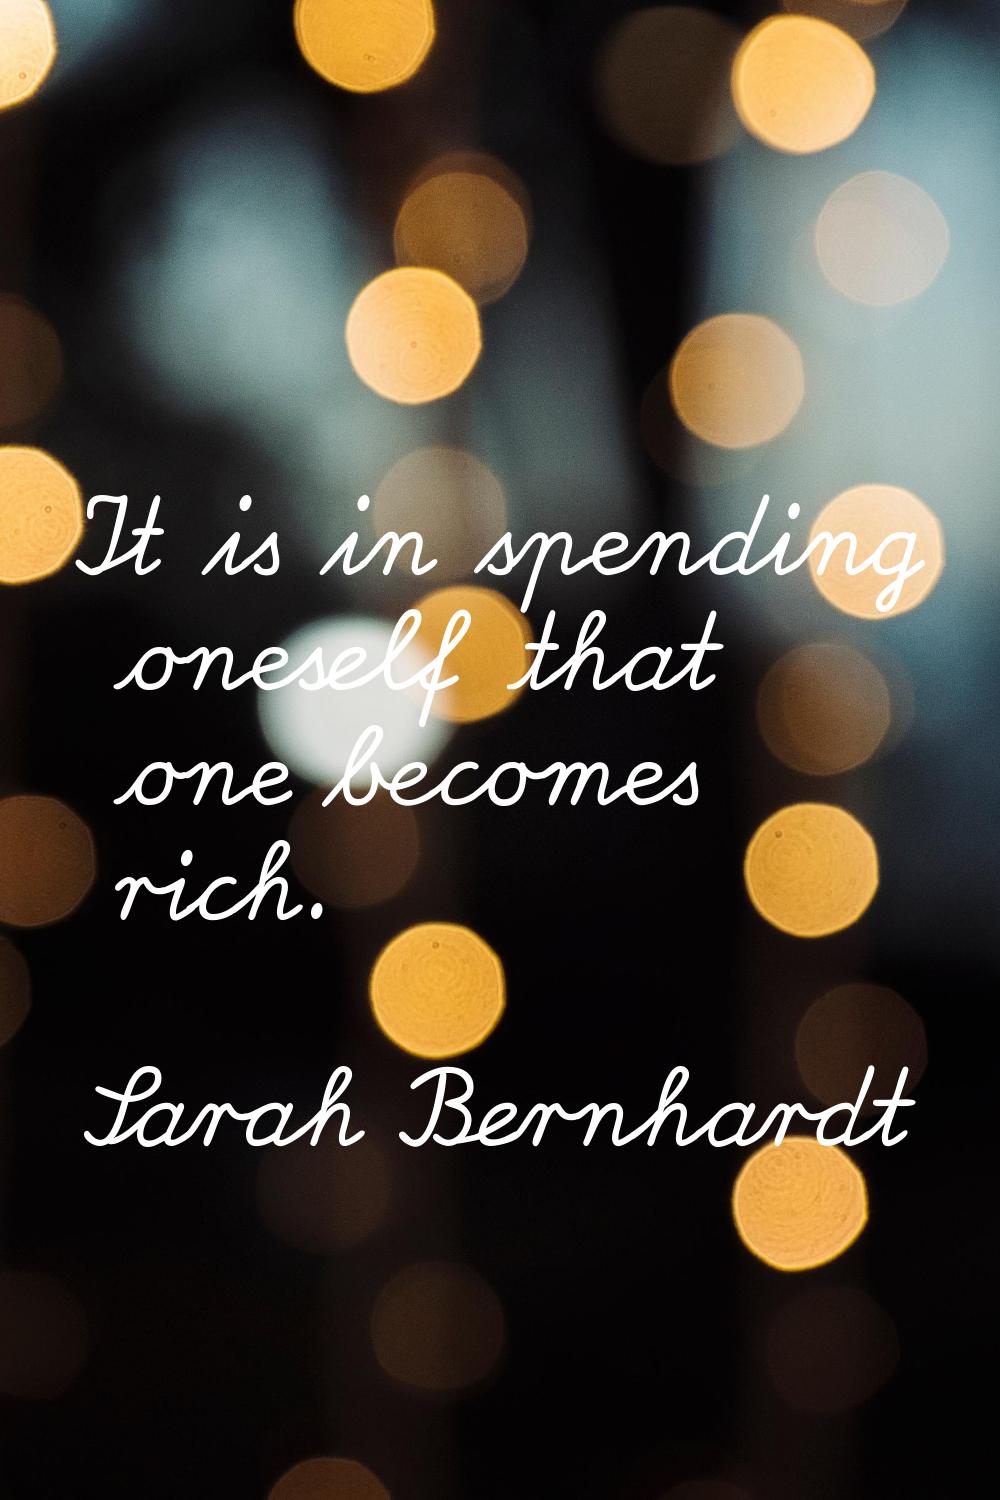 It is in spending oneself that one becomes rich.